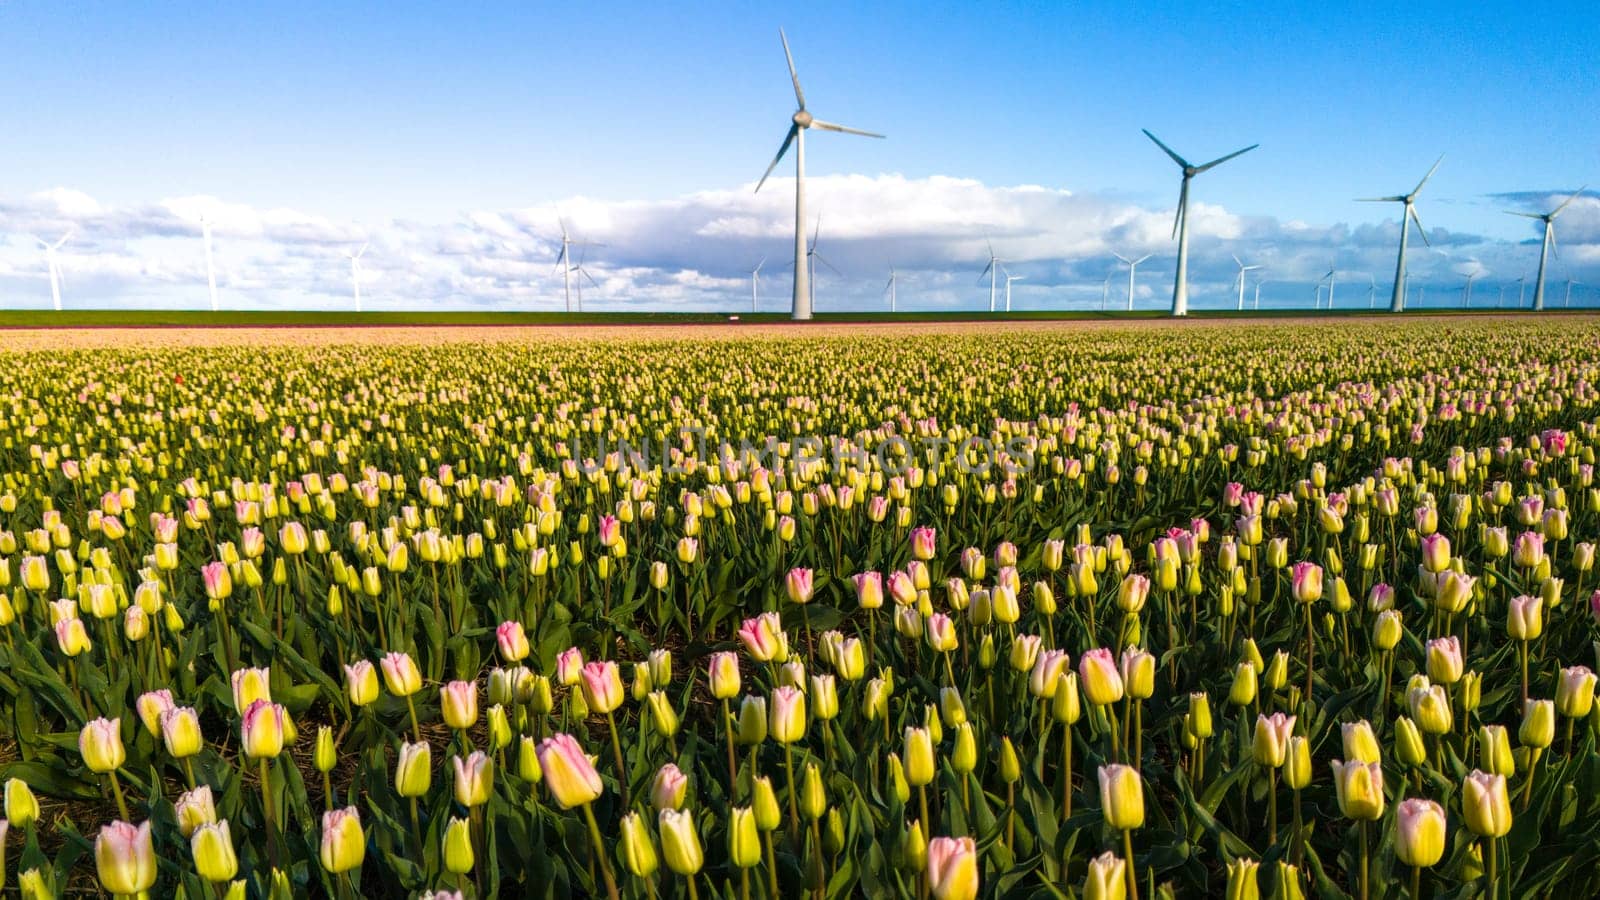 A vast field of colorful flowers sways gently in the breeze, with towering windmill turbines under a clear blue sky in the Netherlands in Spring. energy transition, green energy carbon neutral